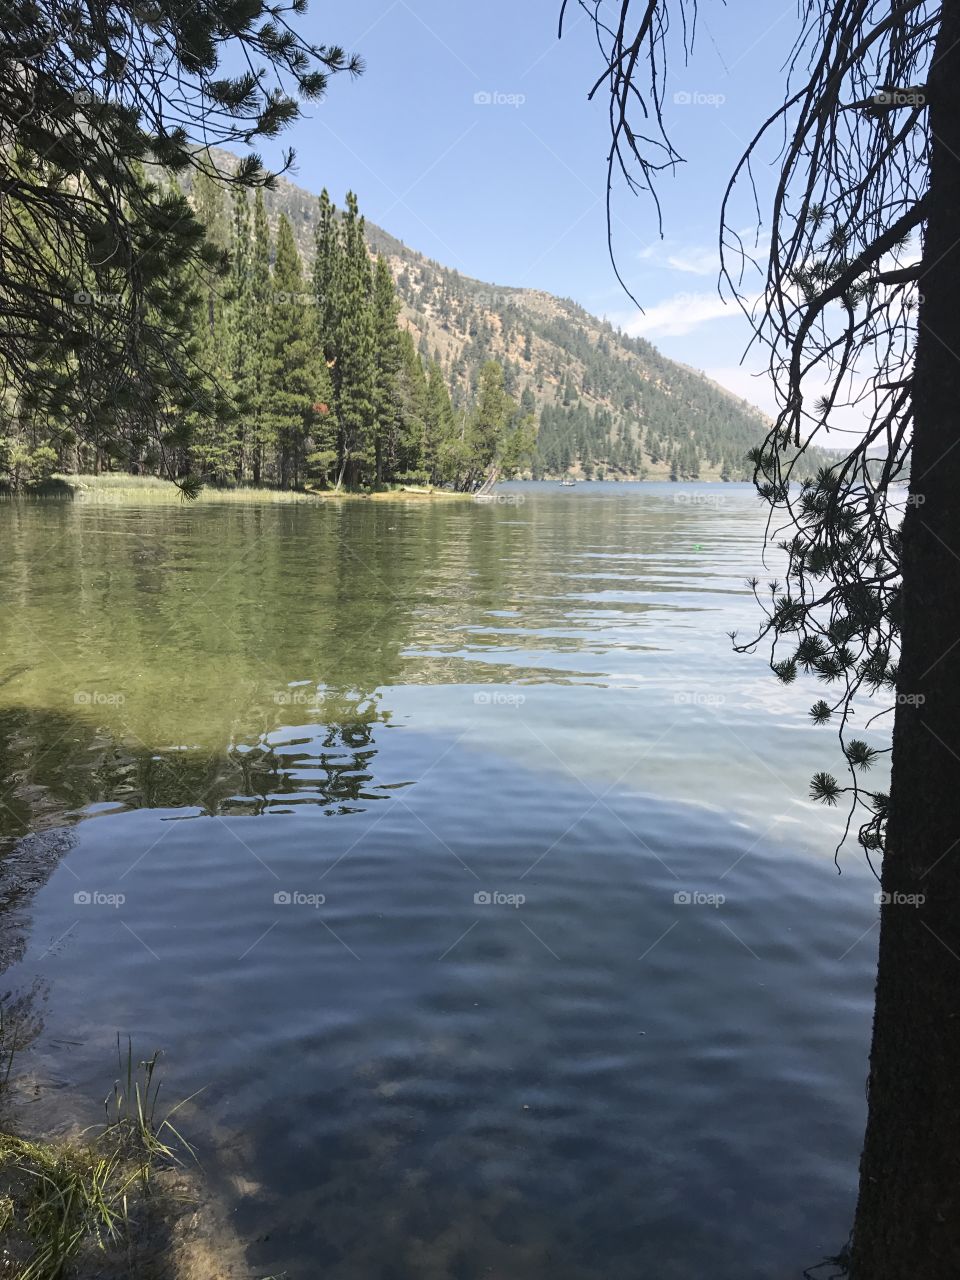 Upper Twin lake in Bridgeport California. A beautiful place for hiking, fishing, camping, kayaking and so many other things. It’s so peaceful and the air is so fresh. 